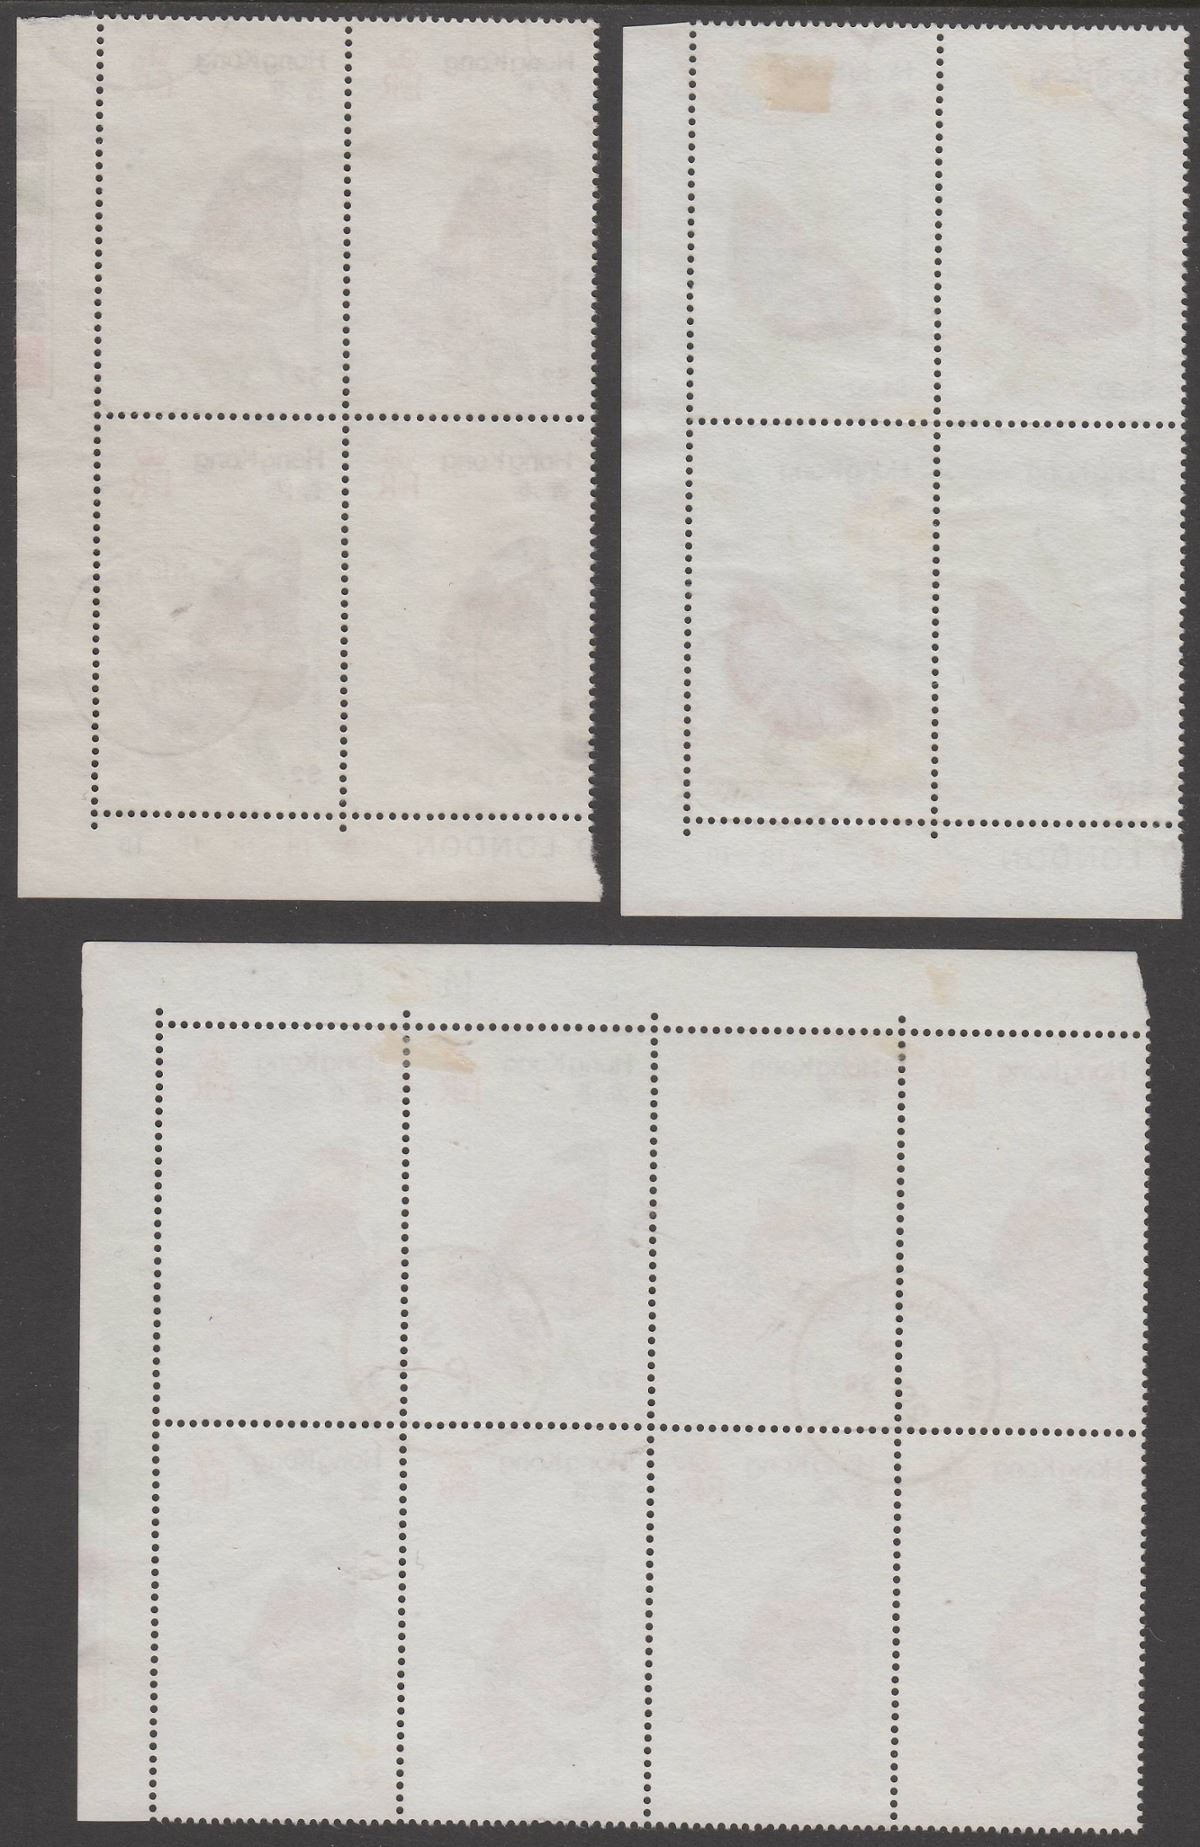 Hong Kong 1979 QEII Butterflies $1.30, $2 Blocks Used Plate Nos + Requisition No